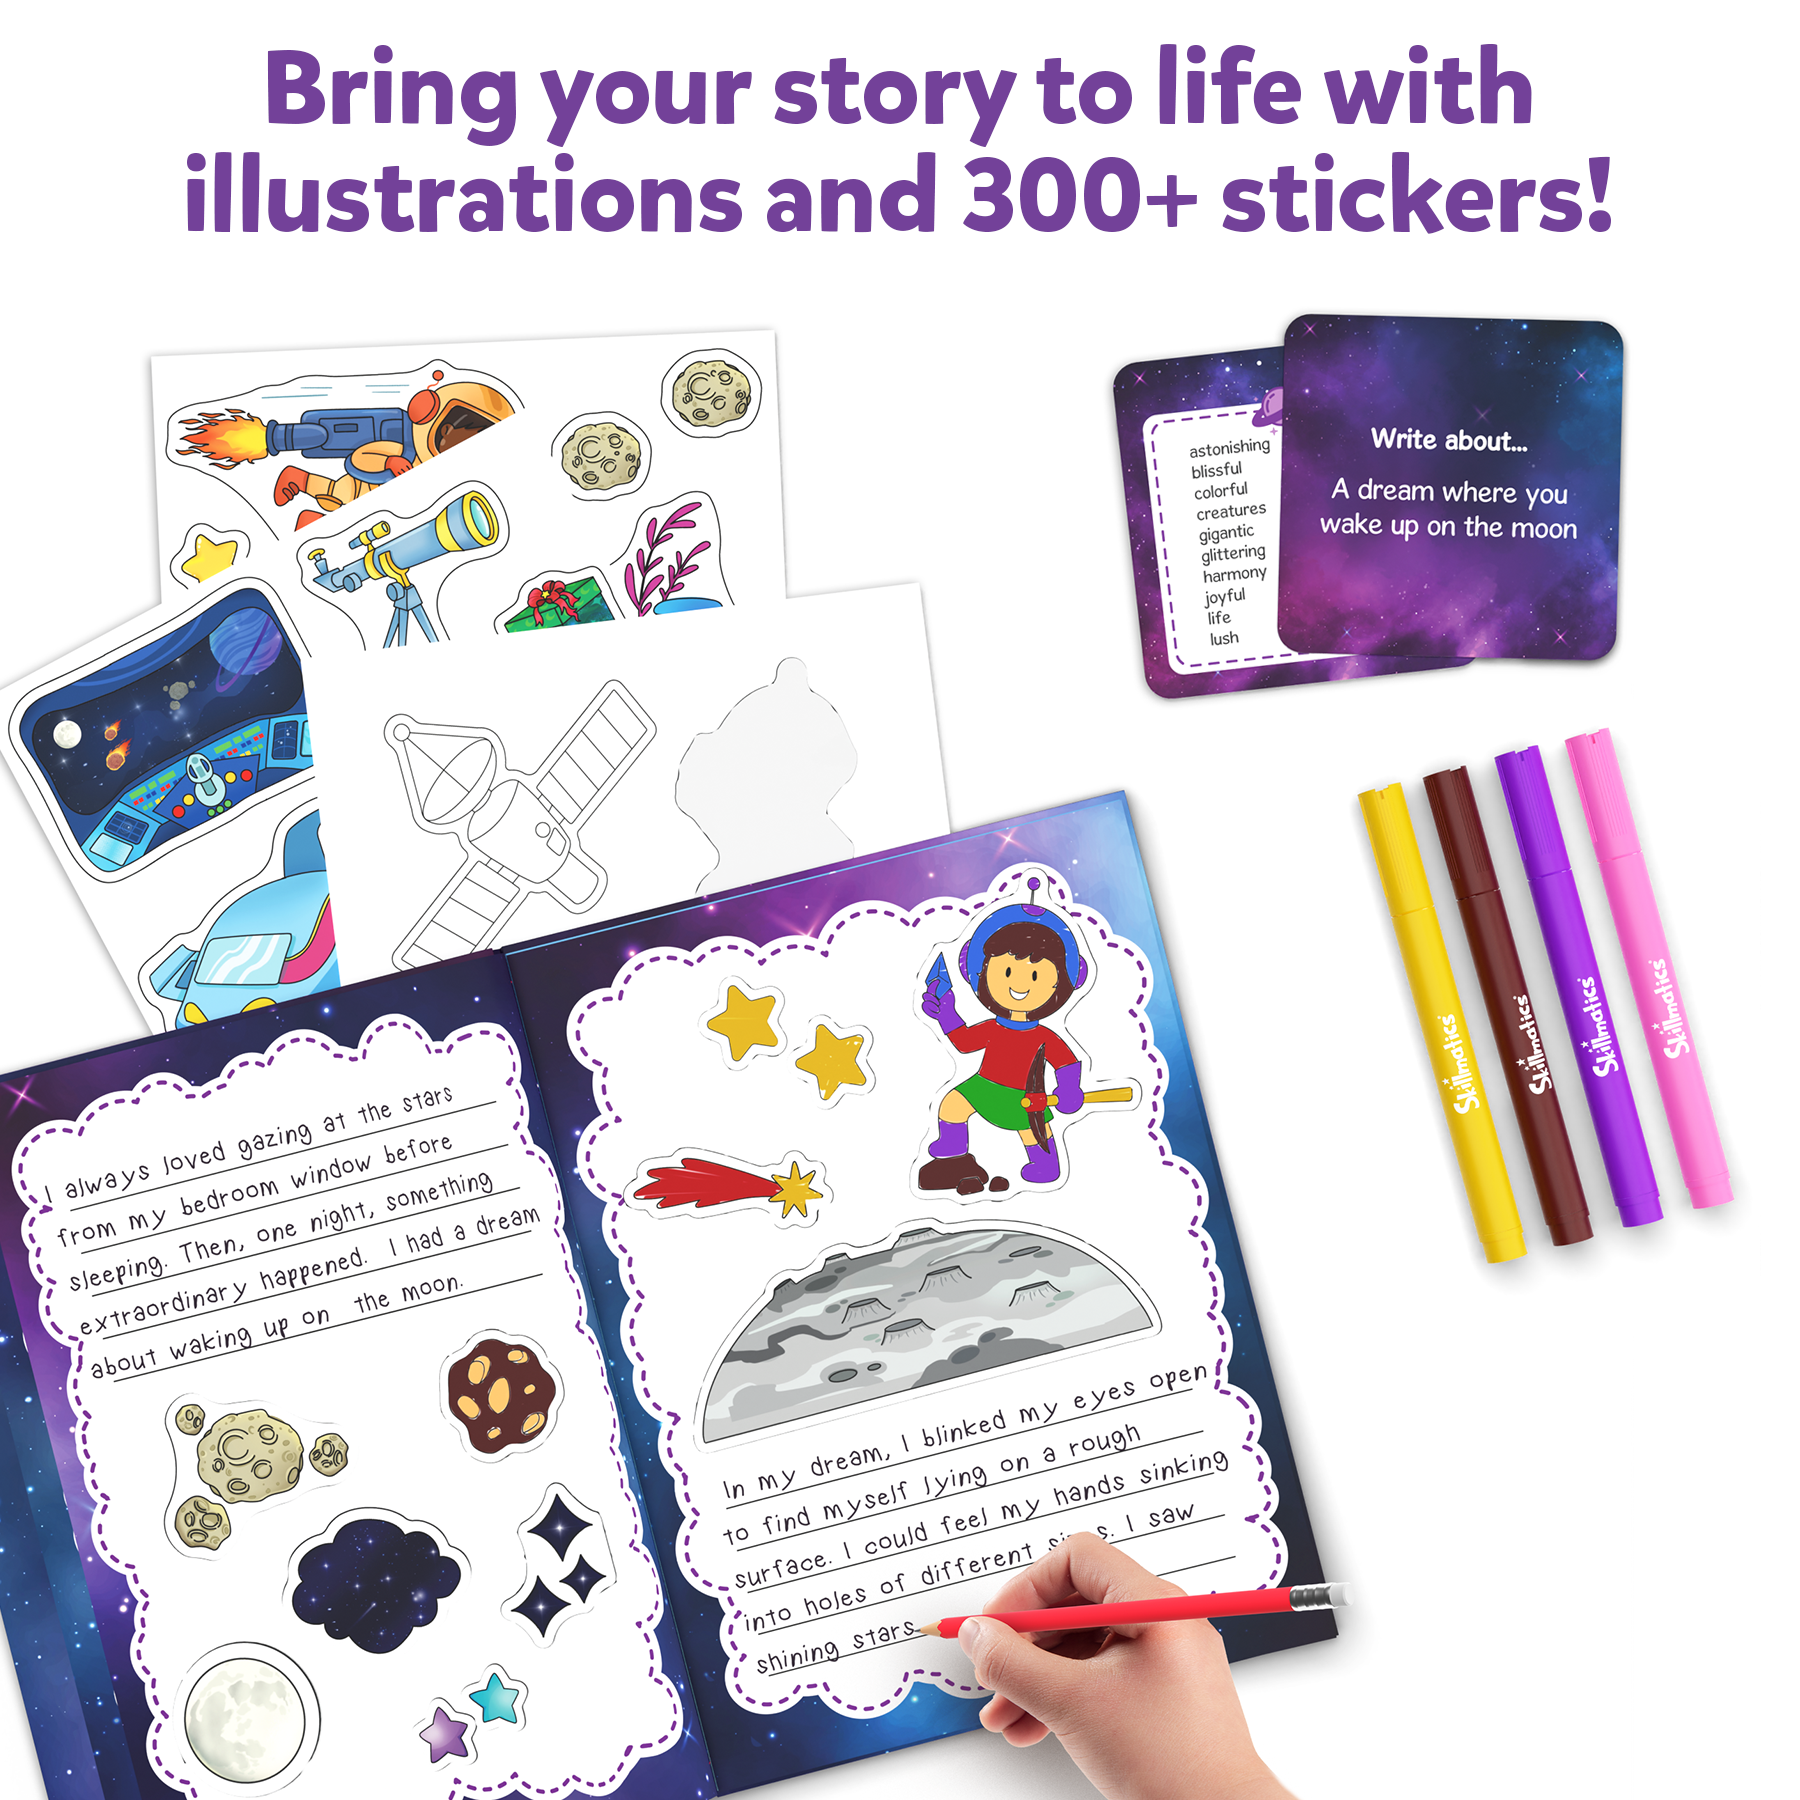 Skillmatics Storybook Art Kit - Space Explorers Art Kit for Kids, Write & Create Storybooks, Creative Activity for Boys & Girls, DIY Kit, 150+ Stickers, Gifts for Ages 5, 6, 7, 8, 9, 10